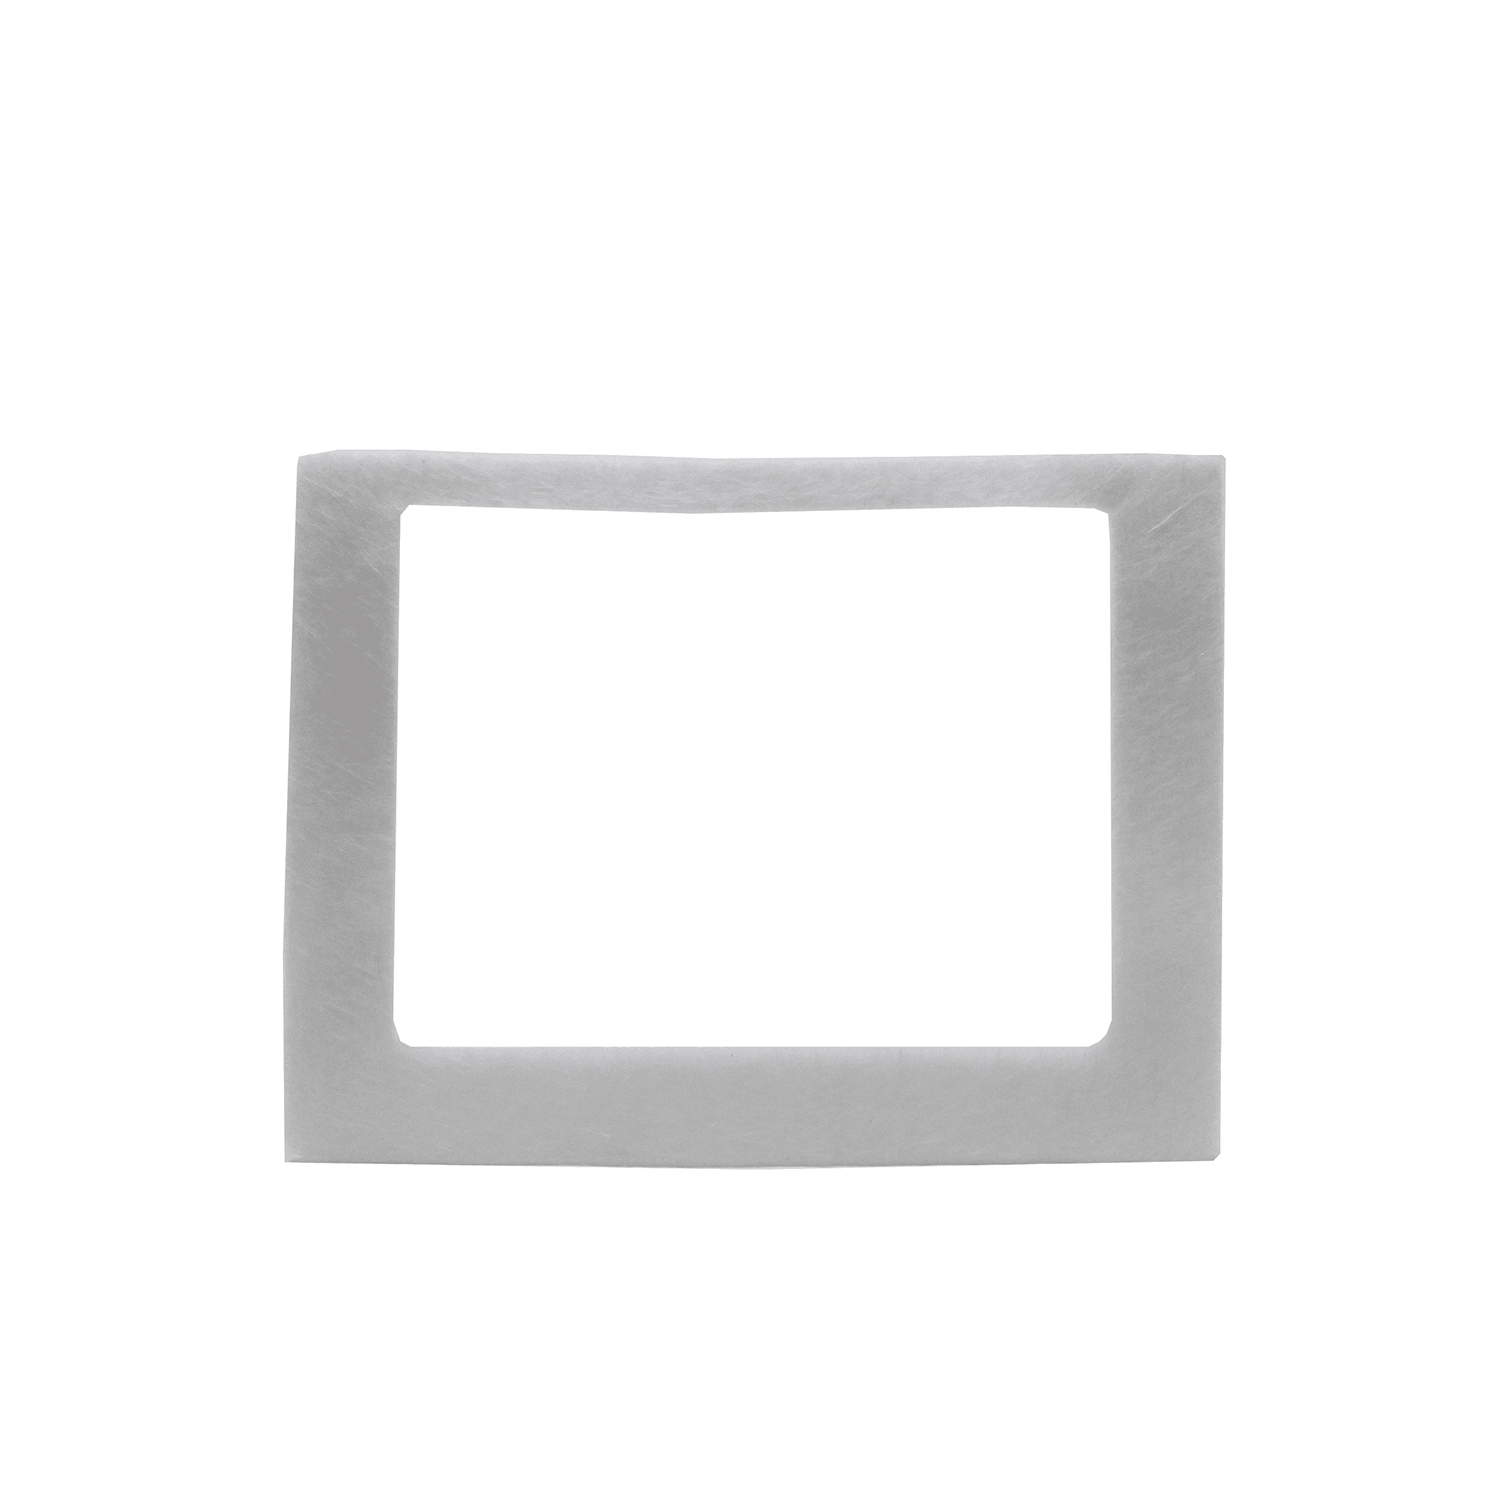 Box Housing Gasket for Pit Boss Pellet Grill-YAOAWE